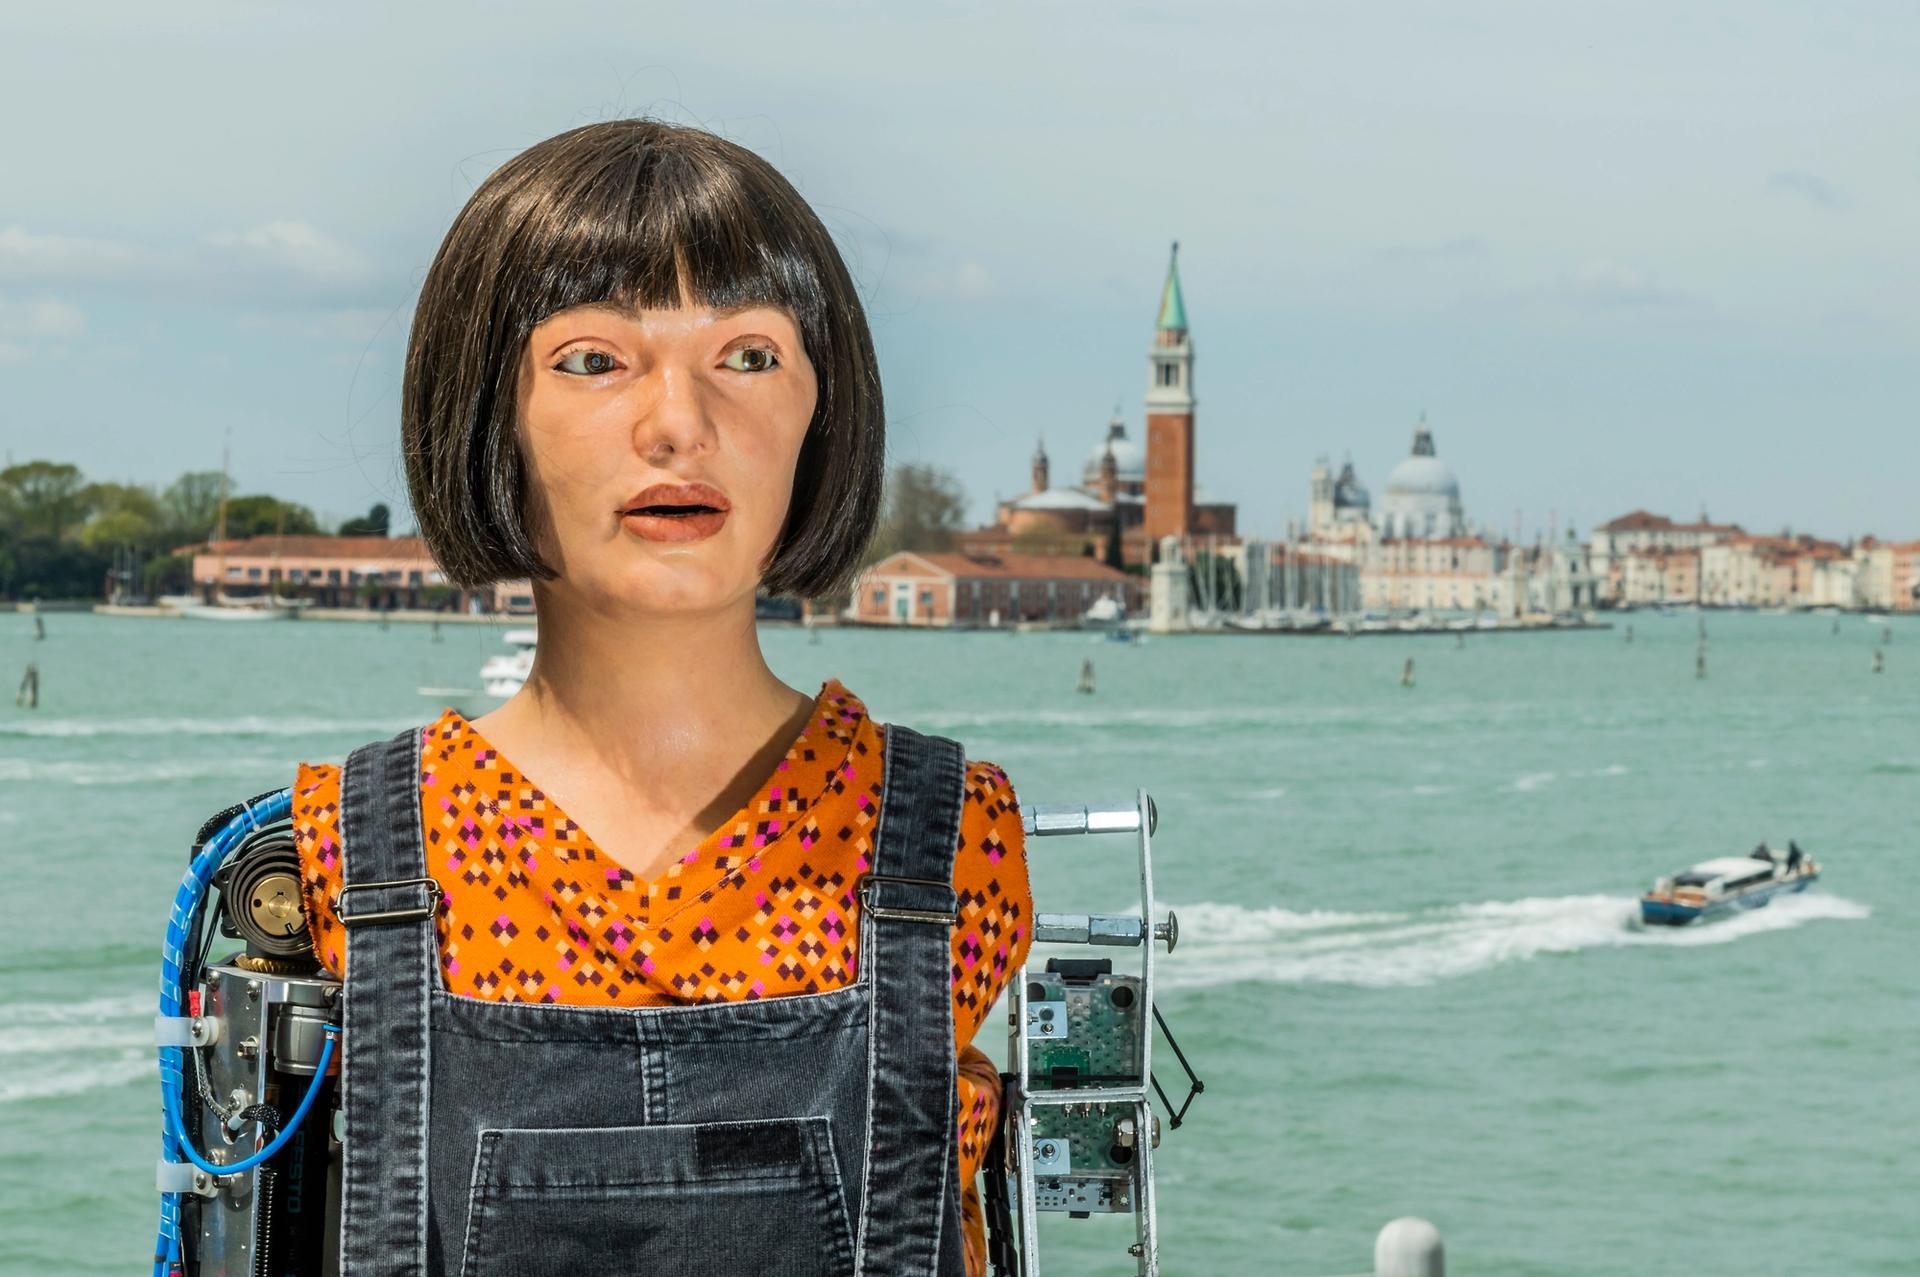 Ai-Da makes history at the Venice Biennale 2022 Photo: Guy Bell